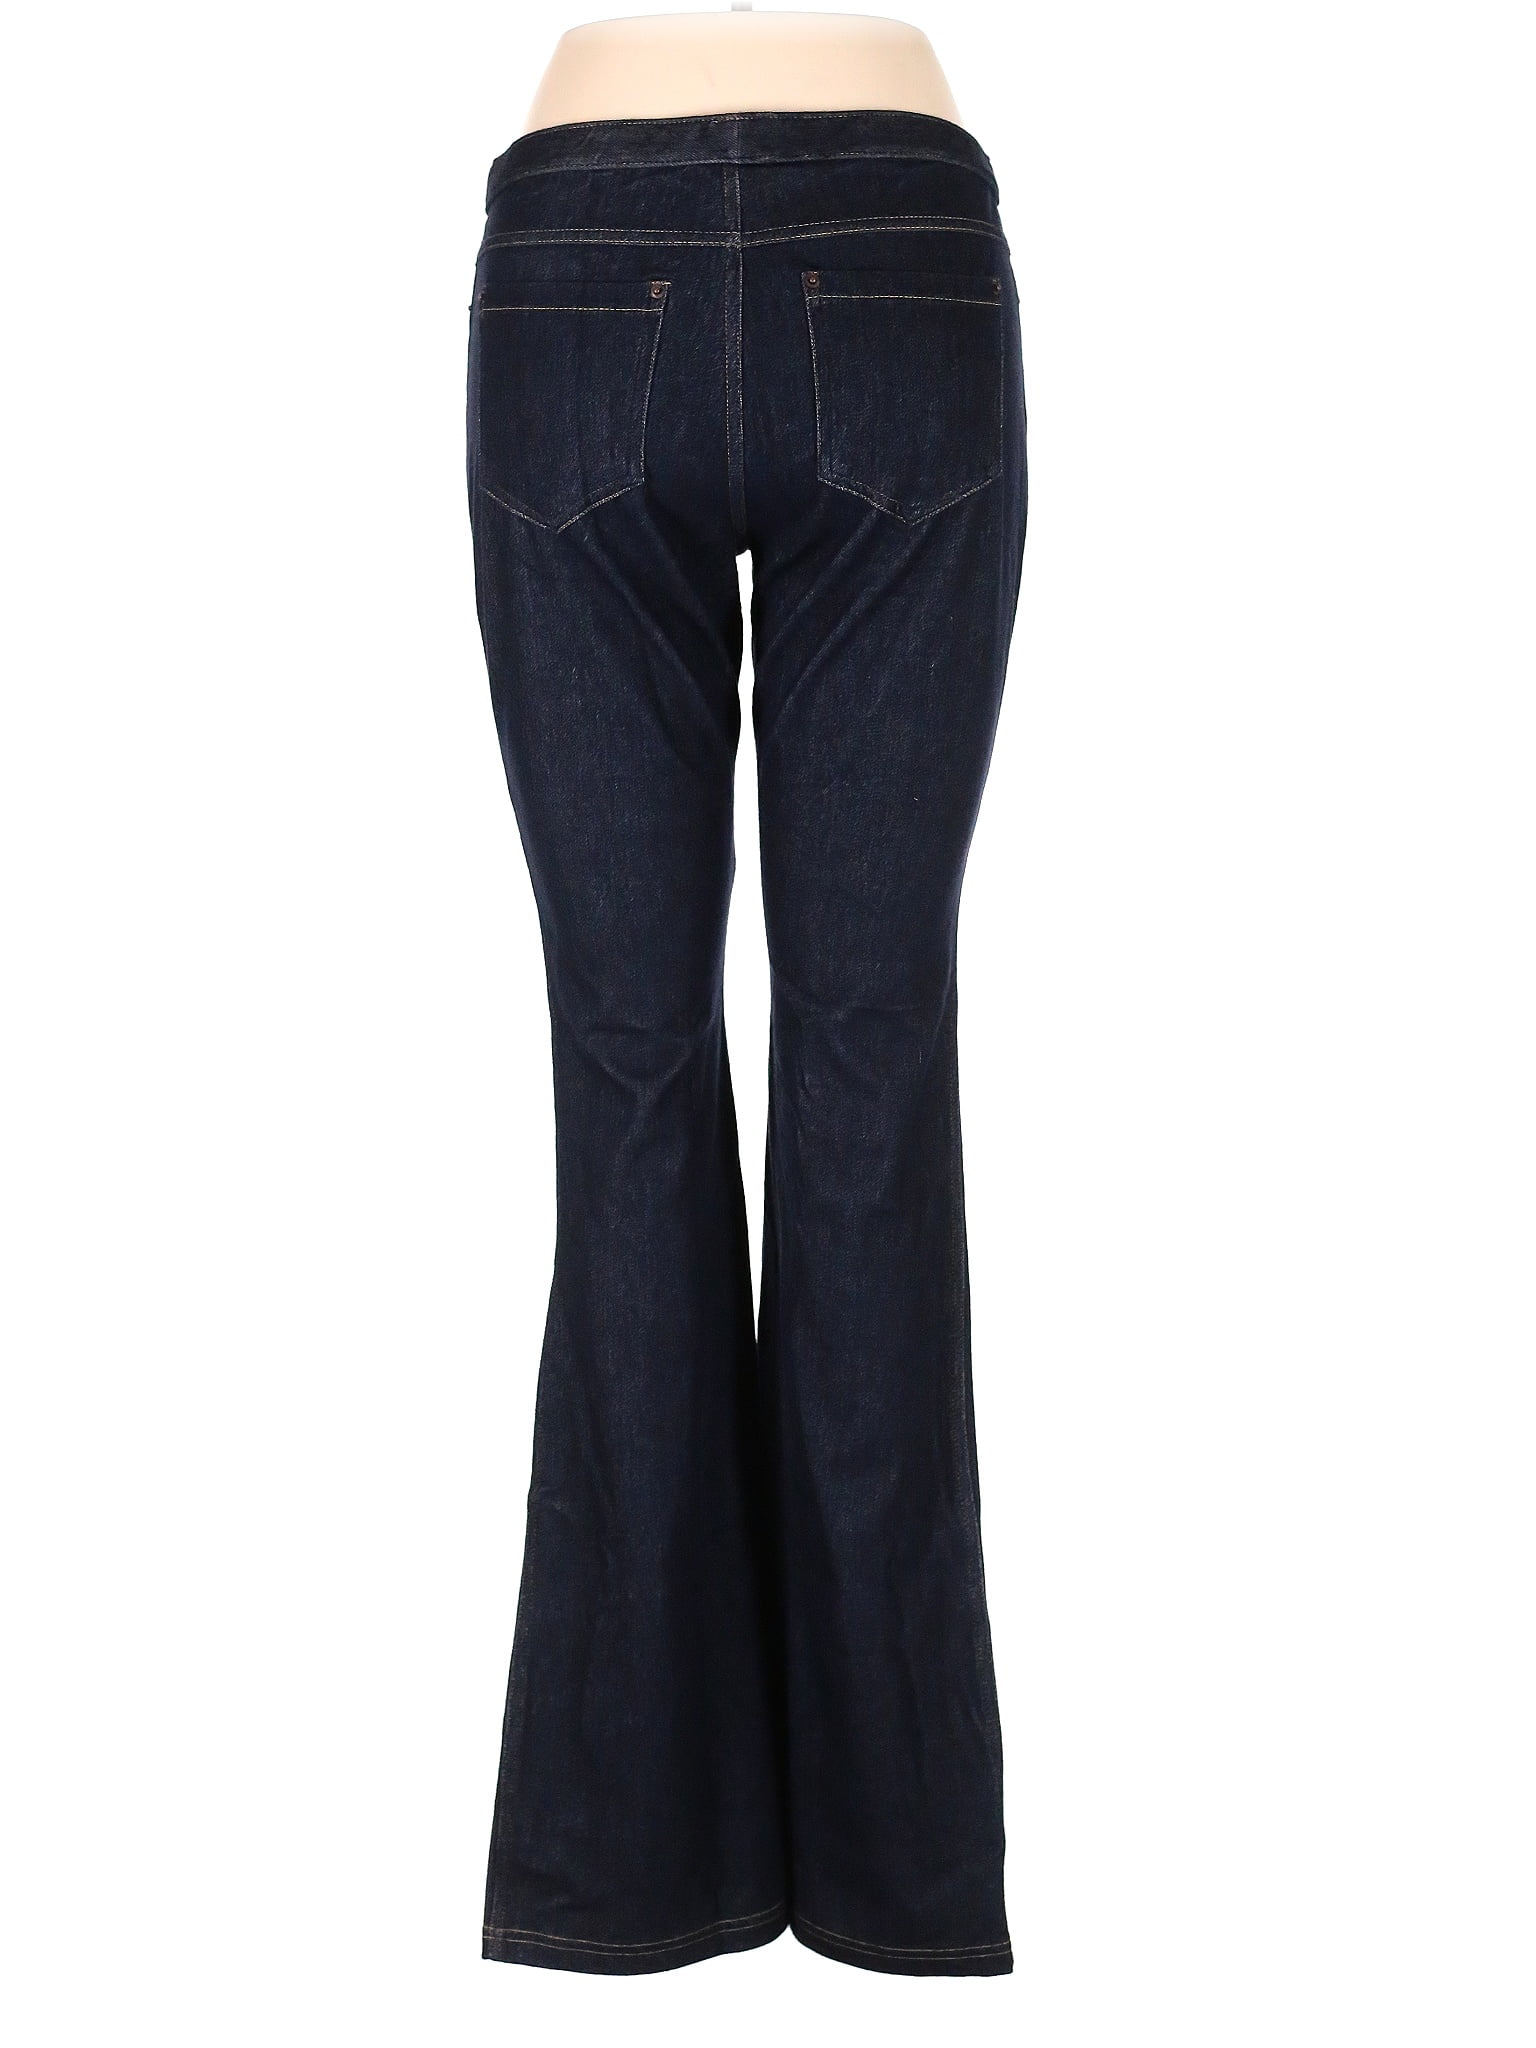 Simply Vera Vera Wang Solid Blue Jeans Size M - 57% off